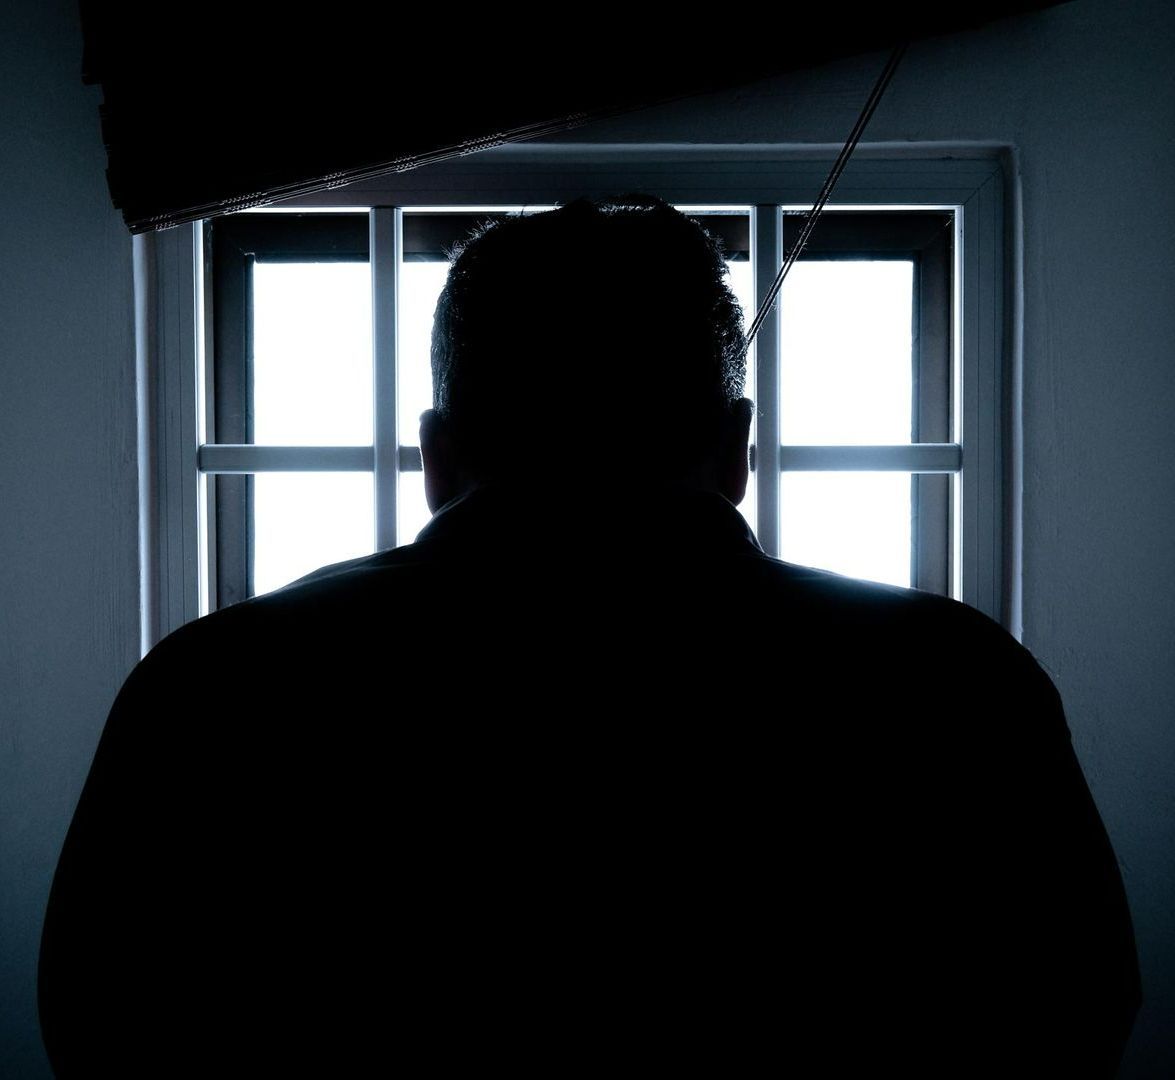 A silhouette of a man behind bars looking out of a window.